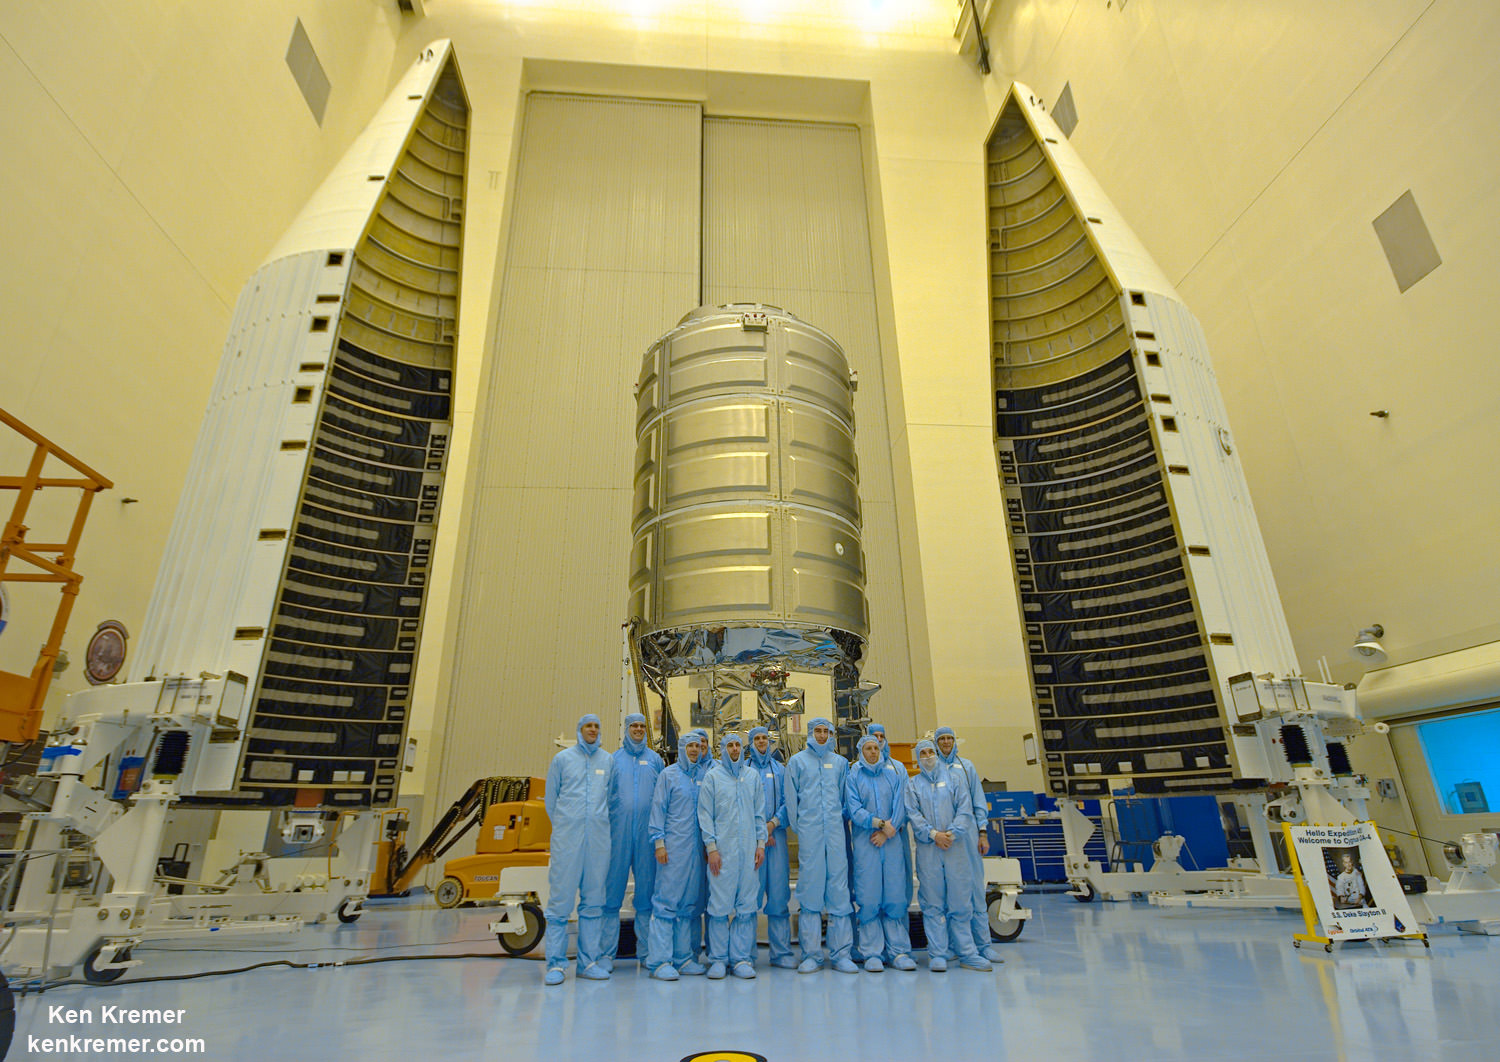 The processing team preparing the  Orbital ATK Cygnus spacecraft for launch on Dec. 3, 2015 poses with the SS Deke Slayton II cargo ship and twin payload enclosure fairings inside the Kennedy Space Center clean room during media visit on Nov. 13, 2015.  Credit: Ken Kremer/kenkremer.com